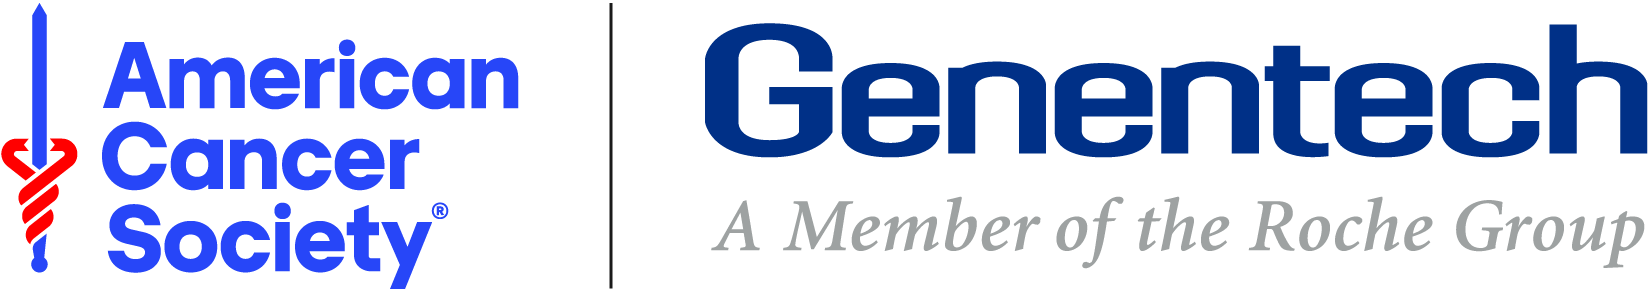 American Cancer Society and Genentech logo